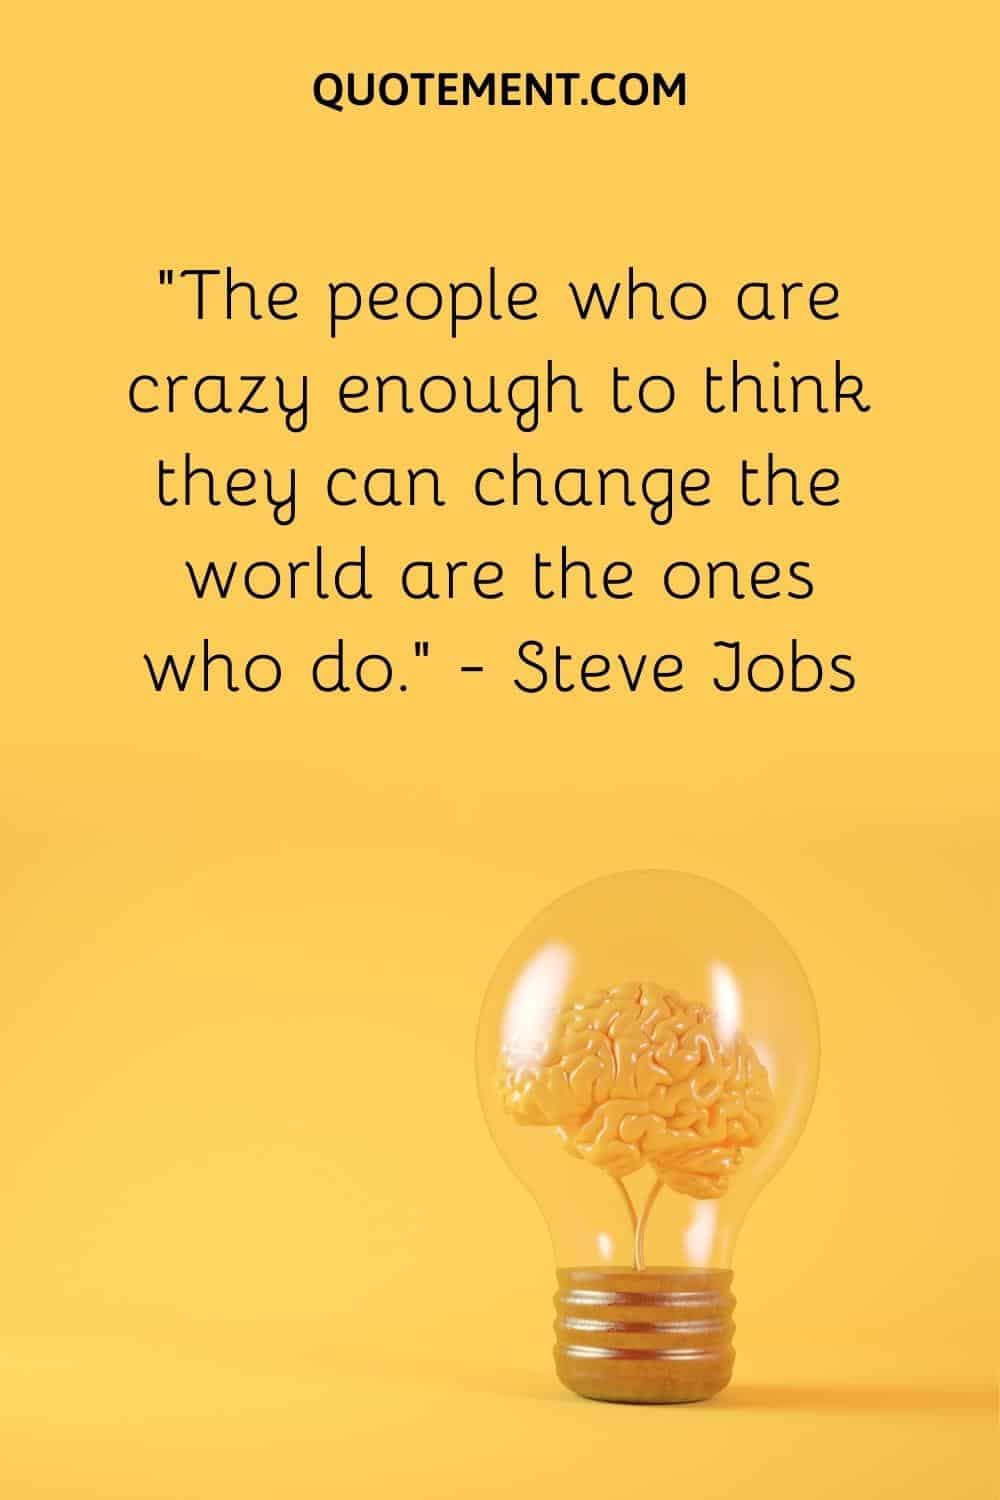 “The people who are crazy enough to think they can change the world are the ones who do.” — Steve Jobs